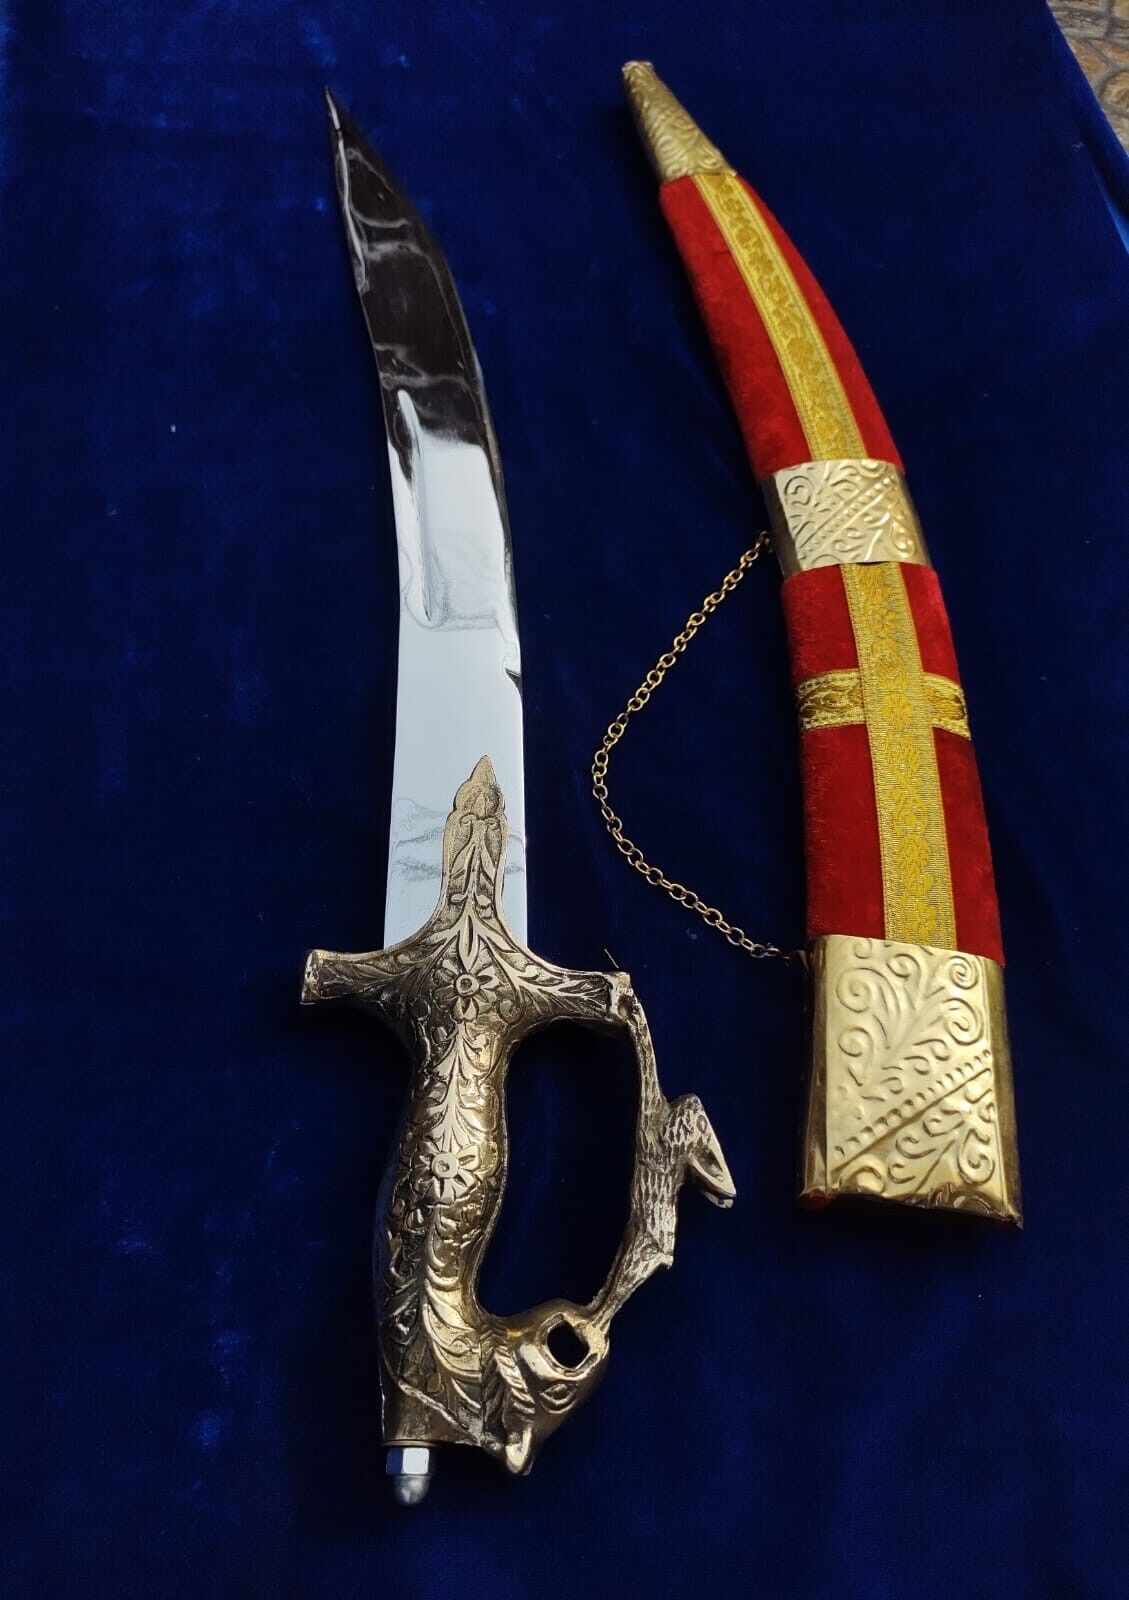 TRADITIONAL INDIAN RAJPUTI SWORD,STAINLESS STEEL BLADE WITH PERSONALISED CARVING